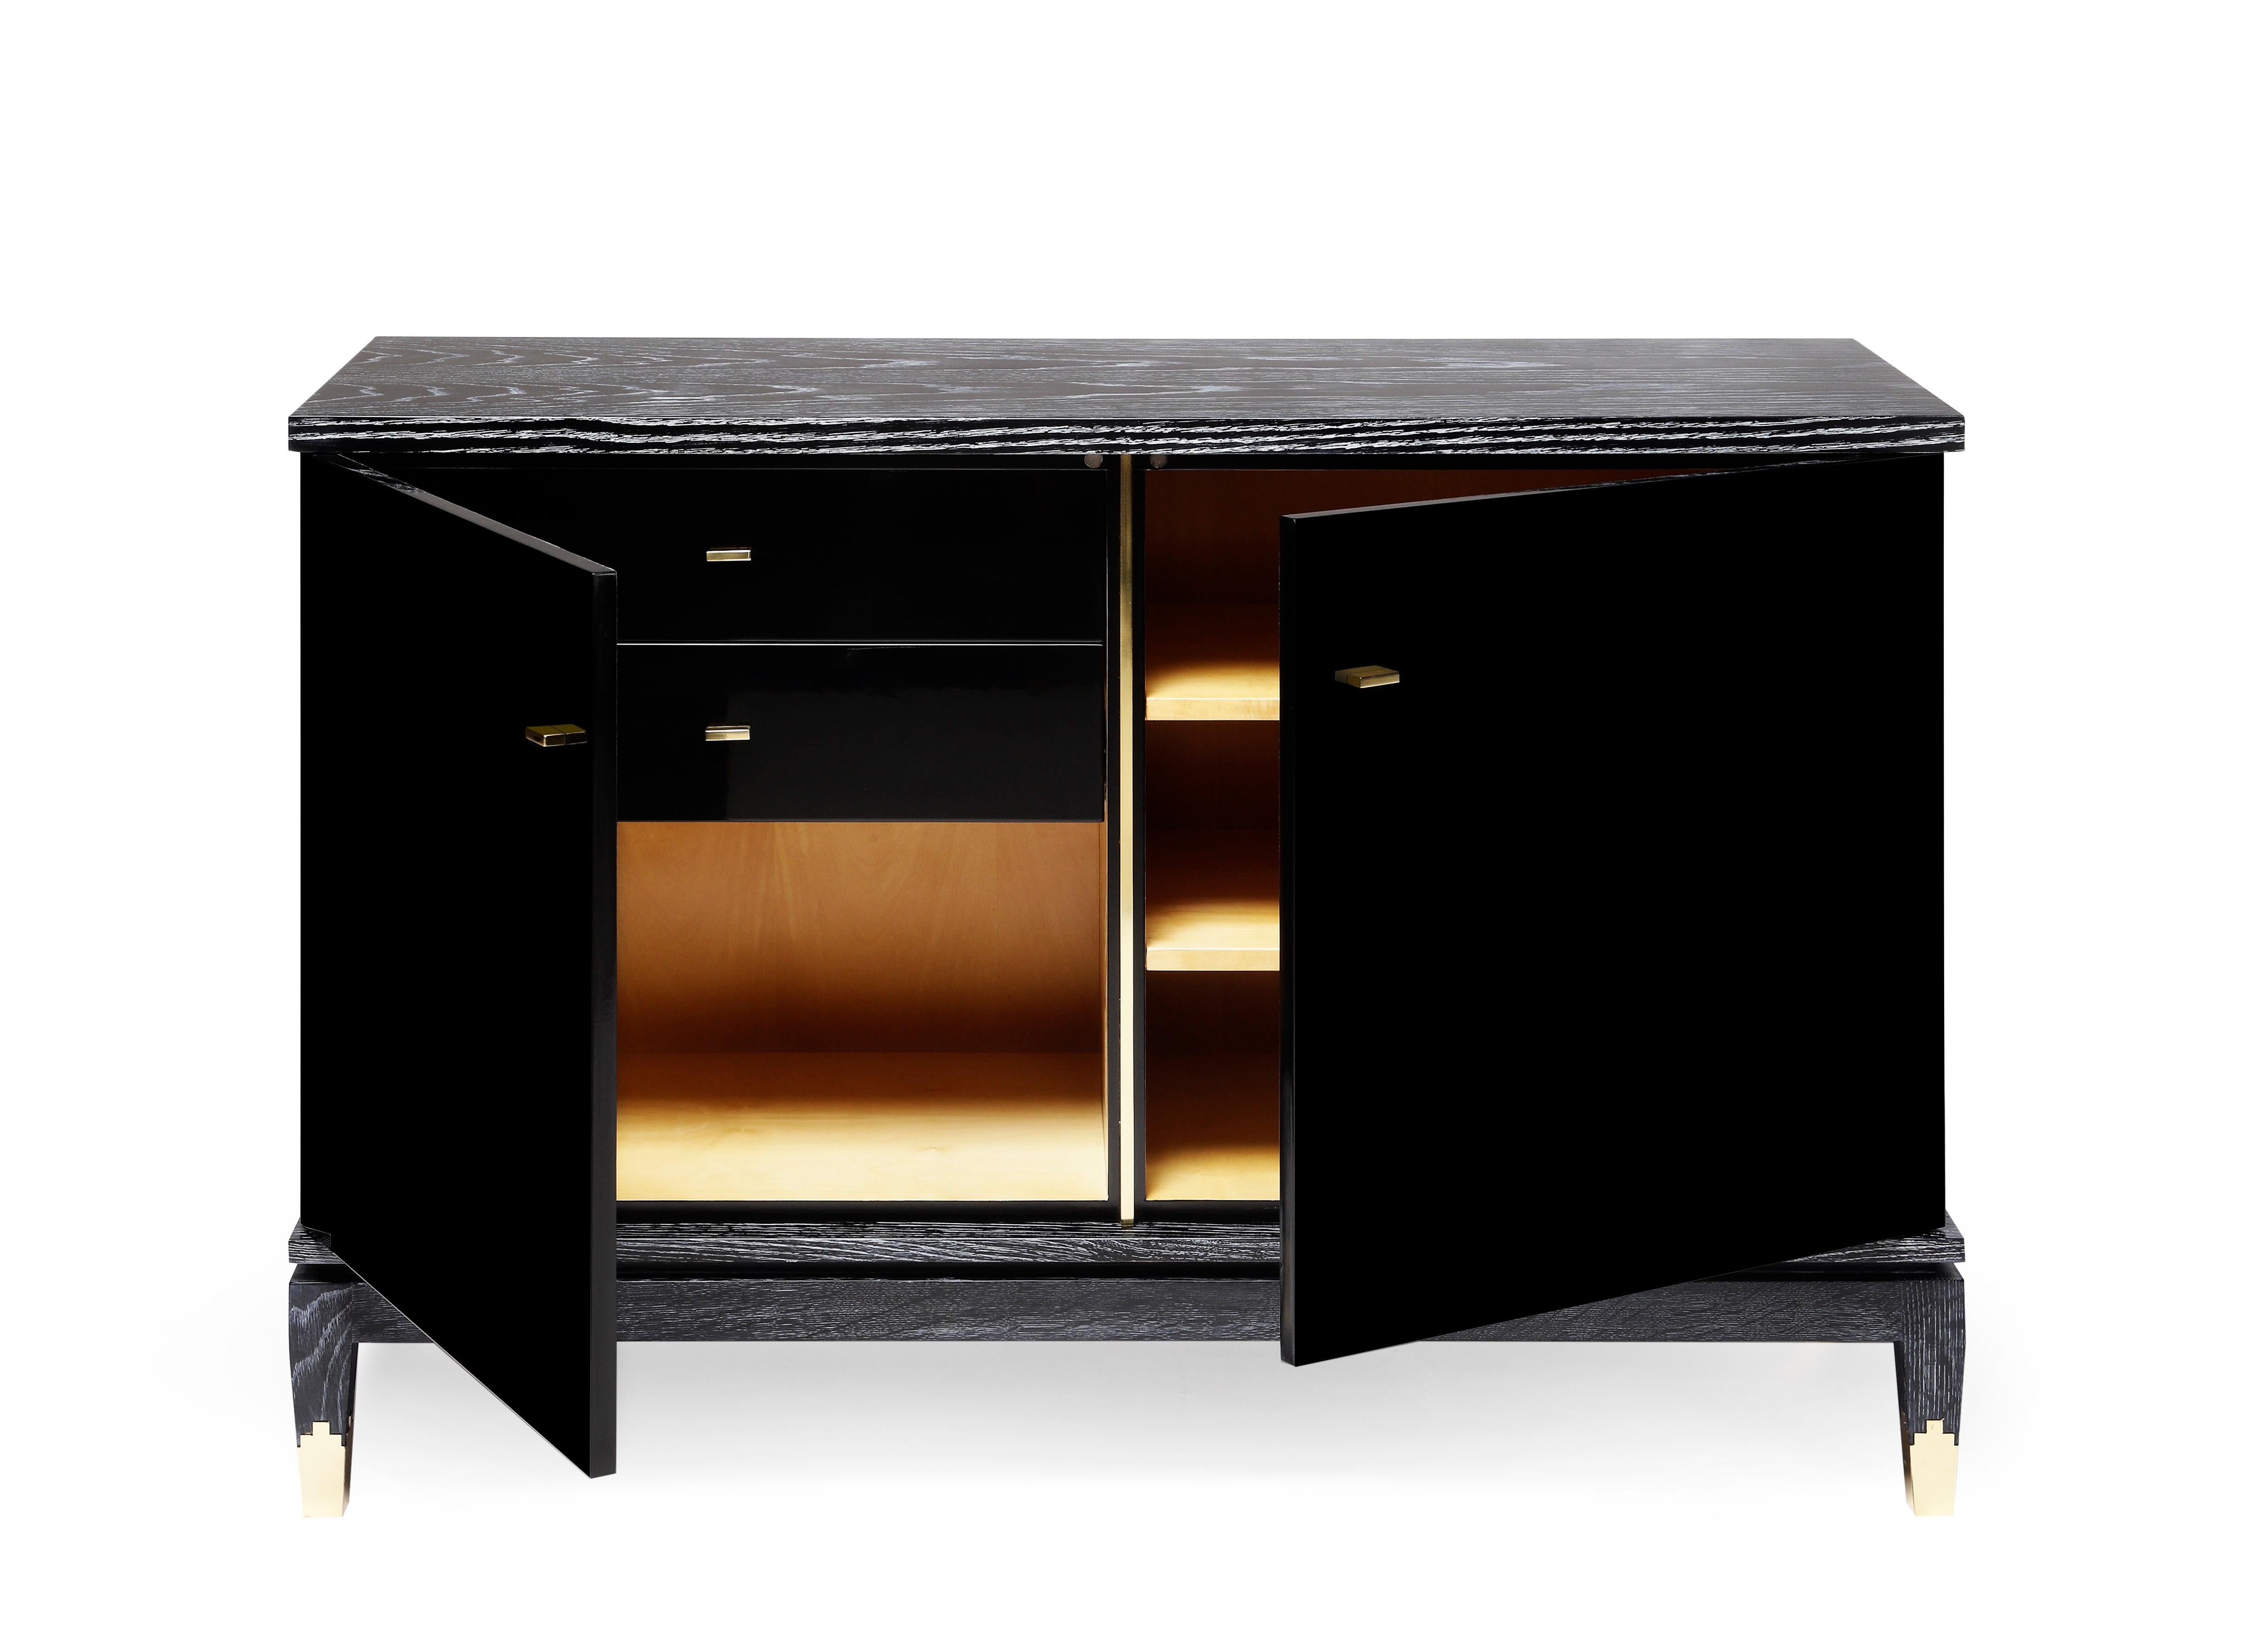 Anna Cabinet, Brushed Oak and Black Limed Finish, Handcrafted by Duistt

Anna is an imposing and elegant cabinet. With a high gloss lacquered body that contrasts with the brushed oak top and feet with lime finish. The delicate brass details add